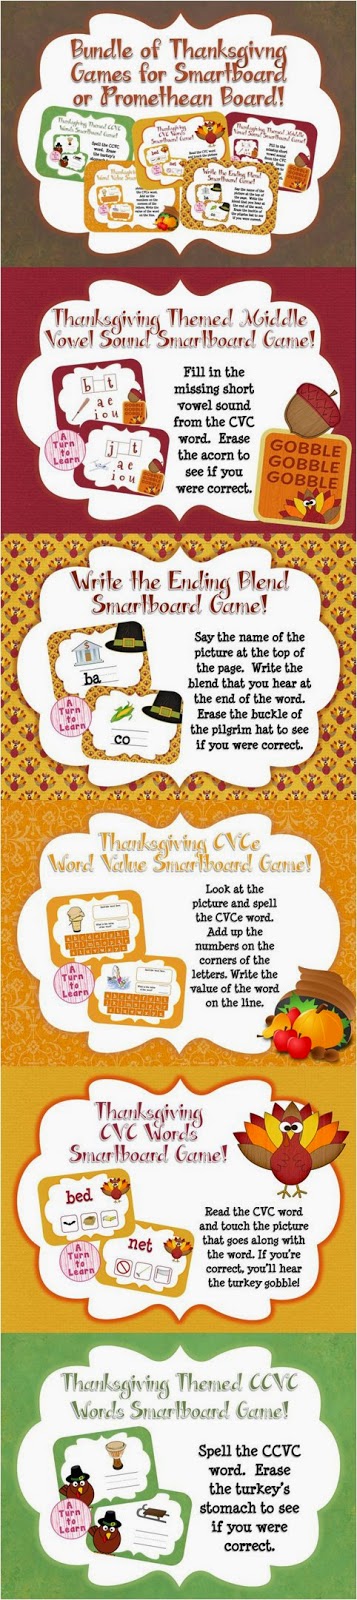  These thanksgiving themed smartboard/promethean board games are perfect for your classroom - not only are they adorable, but they're self checking also! 